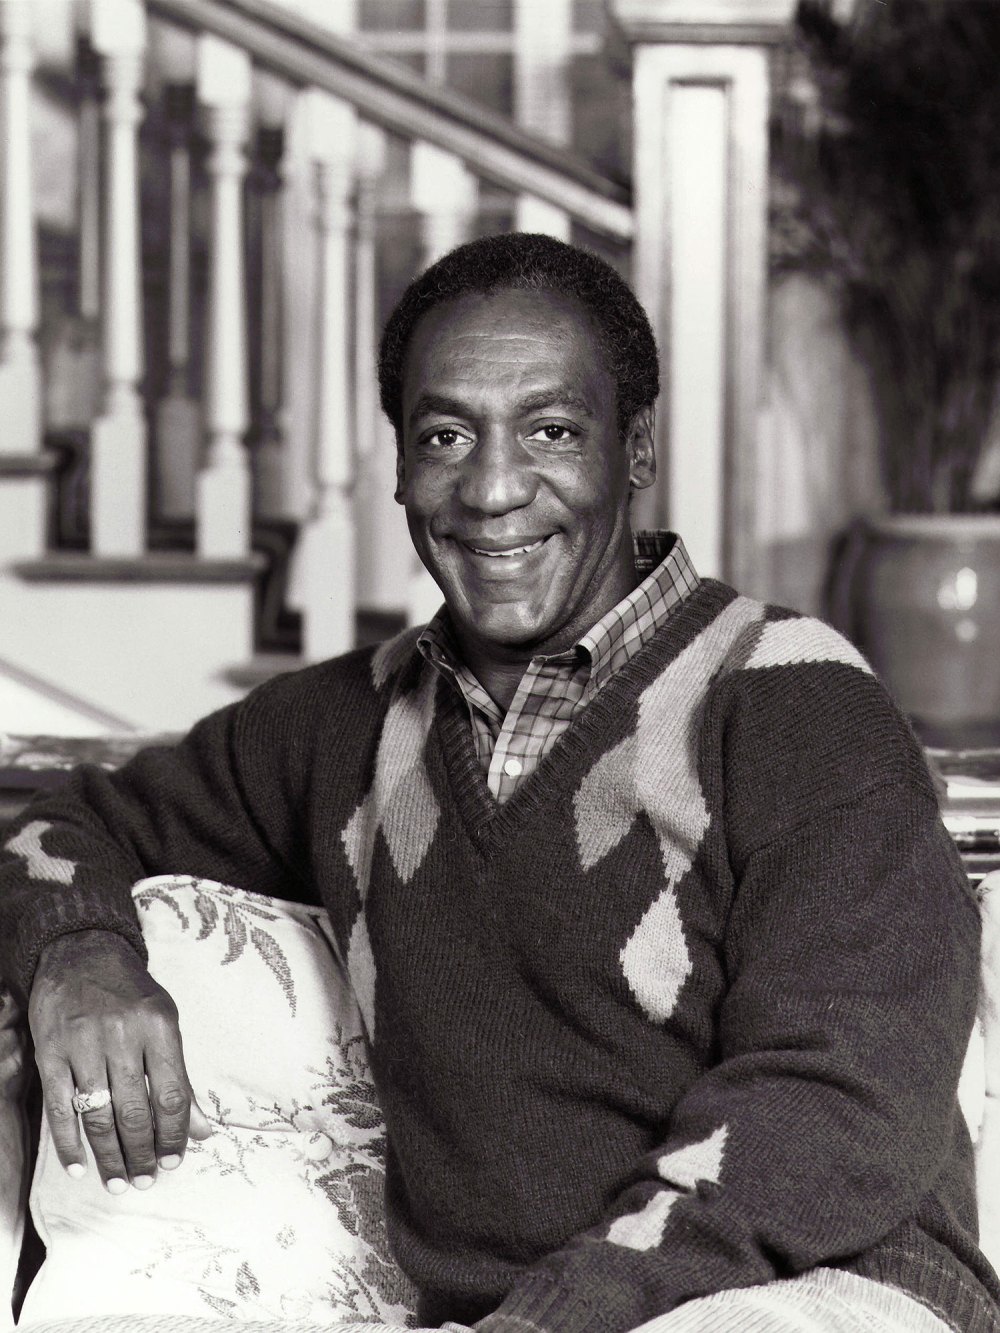 Cosby Show Producers React to Bill Cosby Rape Allegations: Read Statement